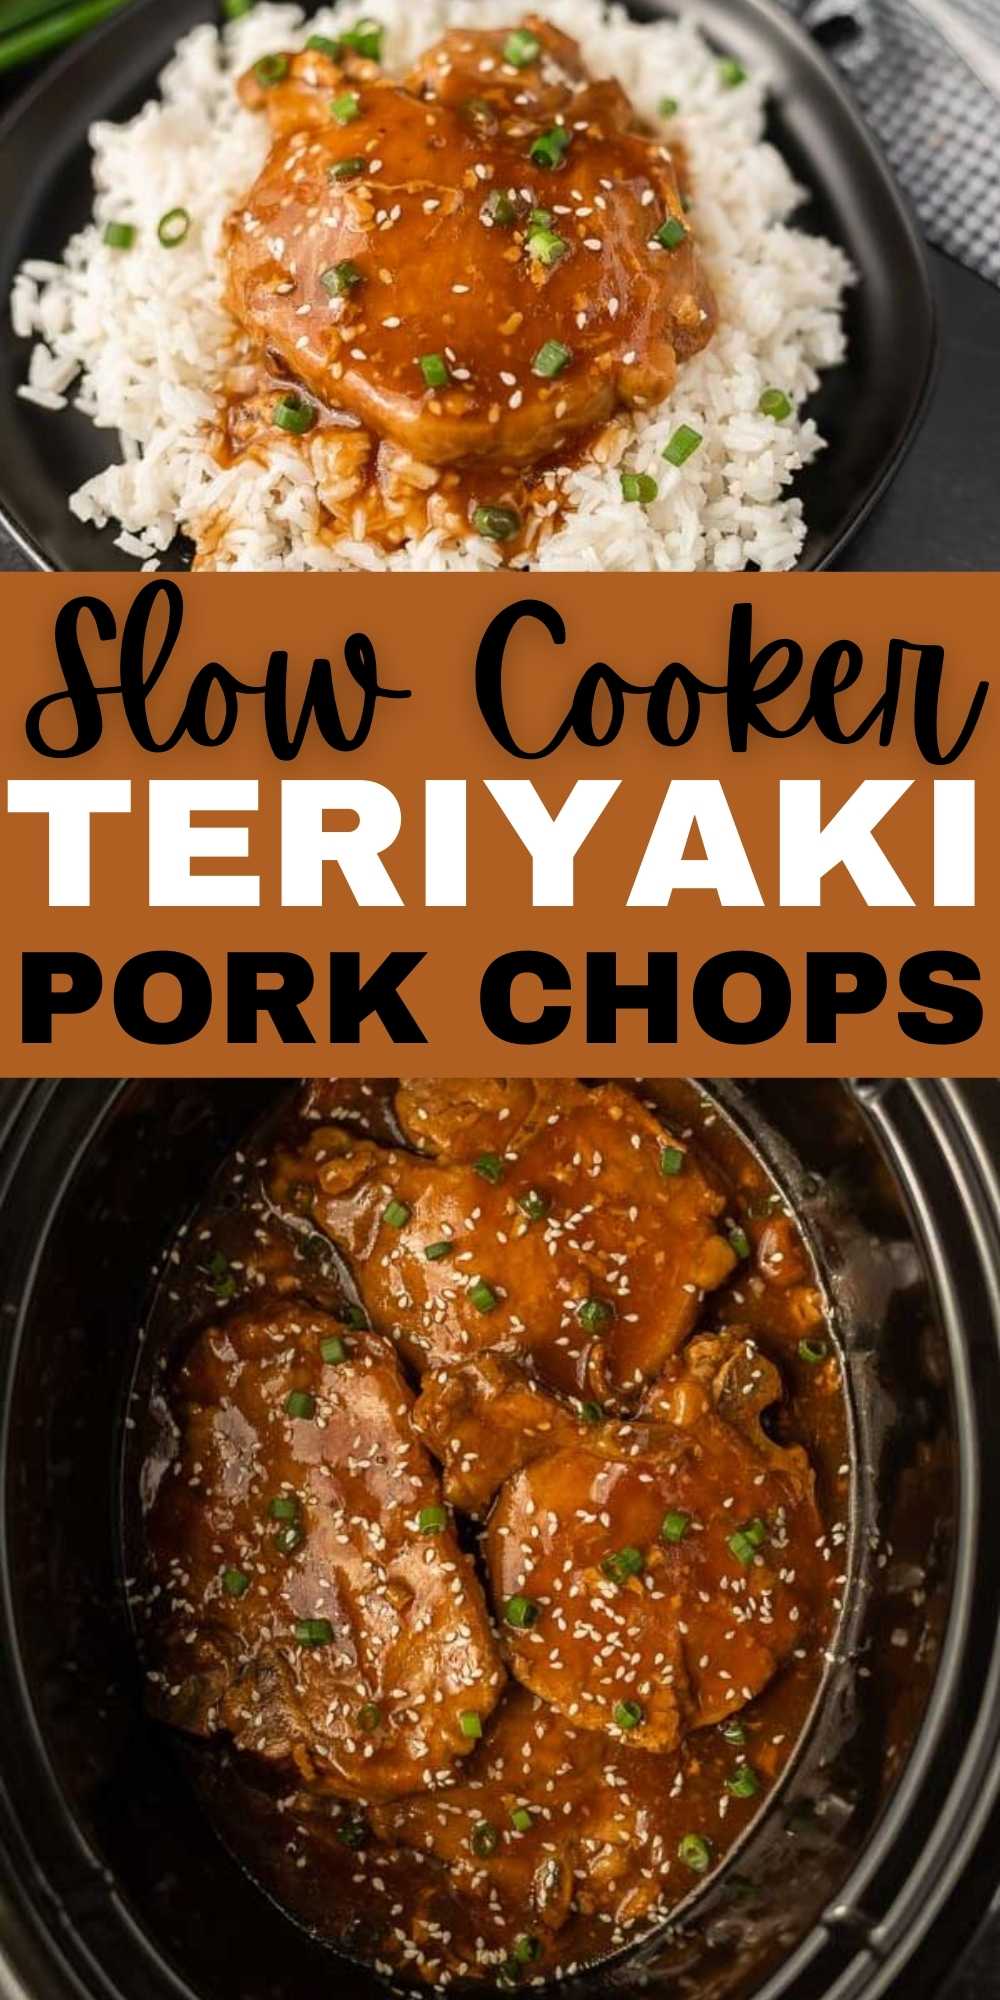 Crockpot teriyaki pork chops recipe is simple and delicious! Teriyaki pork chops with pineapple make an amazing meal. It is a family favorite. You are going to love this easy 5 ingredient crock pot recipe.